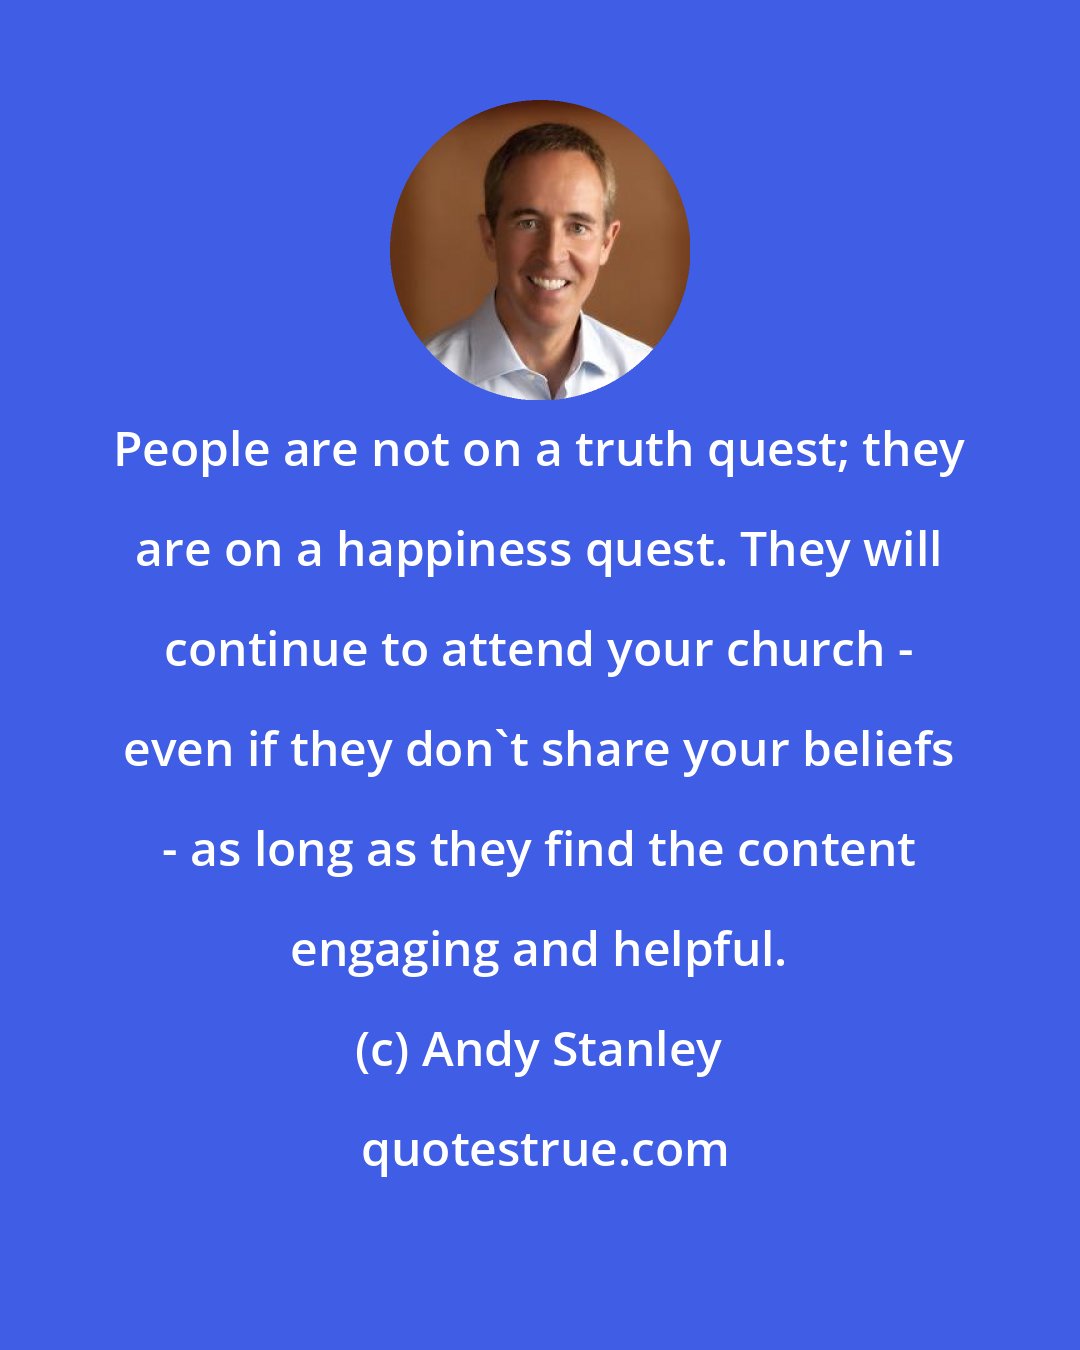 Andy Stanley: People are not on a truth quest; they are on a happiness quest. They will continue to attend your church - even if they don't share your beliefs - as long as they find the content engaging and helpful.